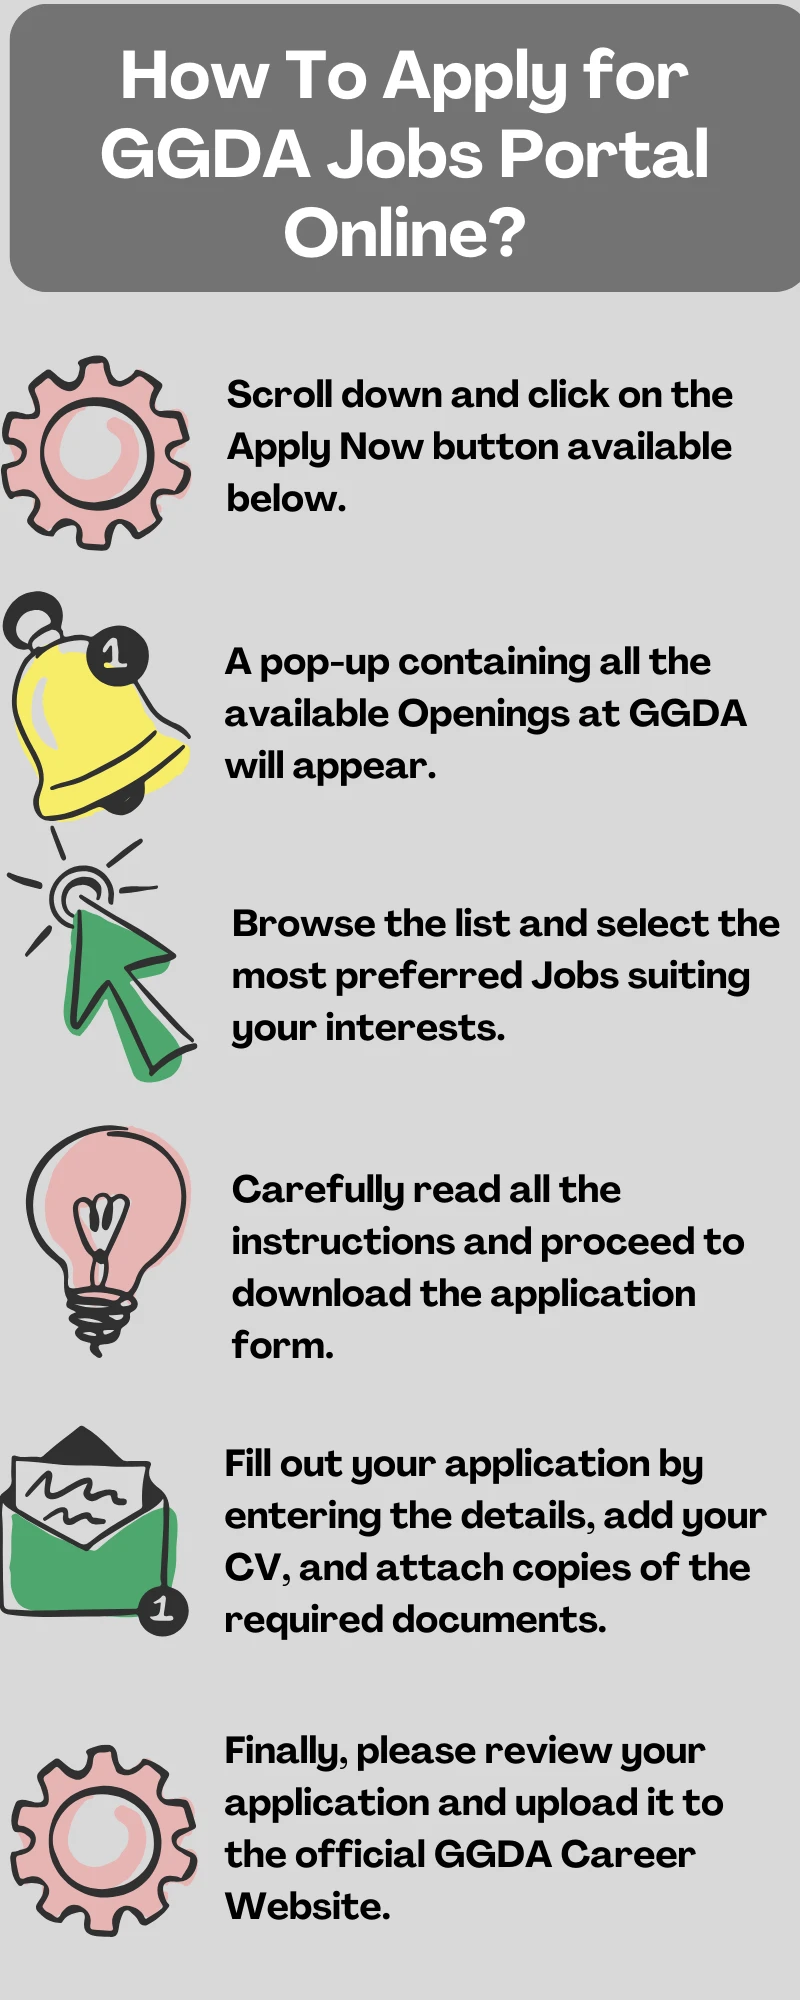 How To Apply for GGDA Jobs Portal Online?